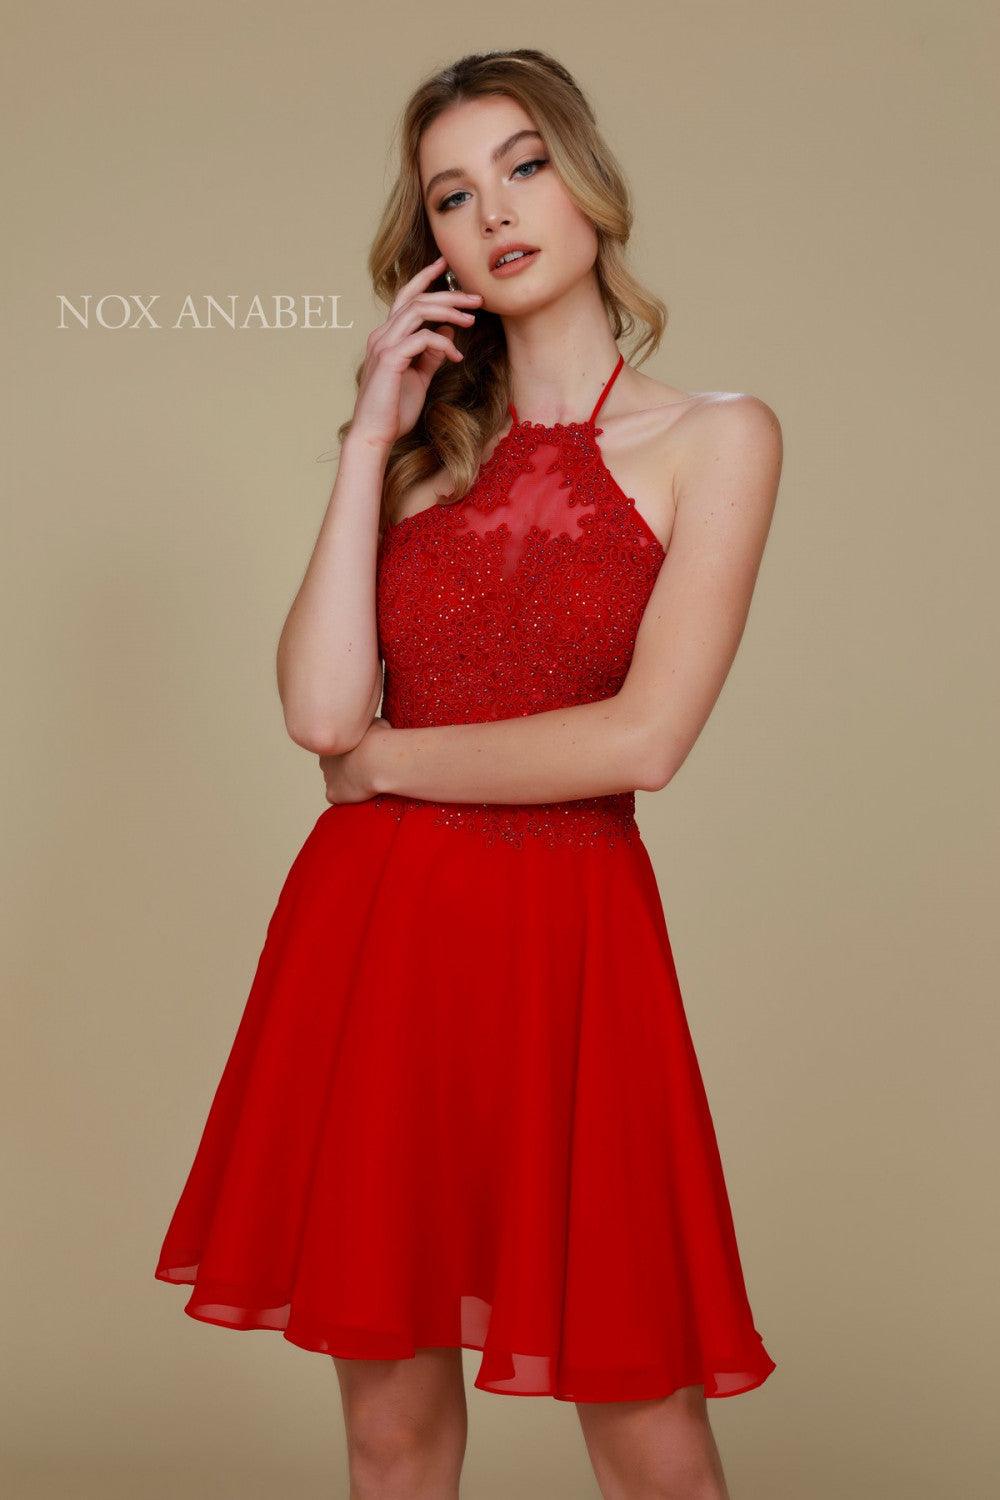 Short Halter Neck Homecoming Prom Dress - The Dress Outlet Nox Anabel